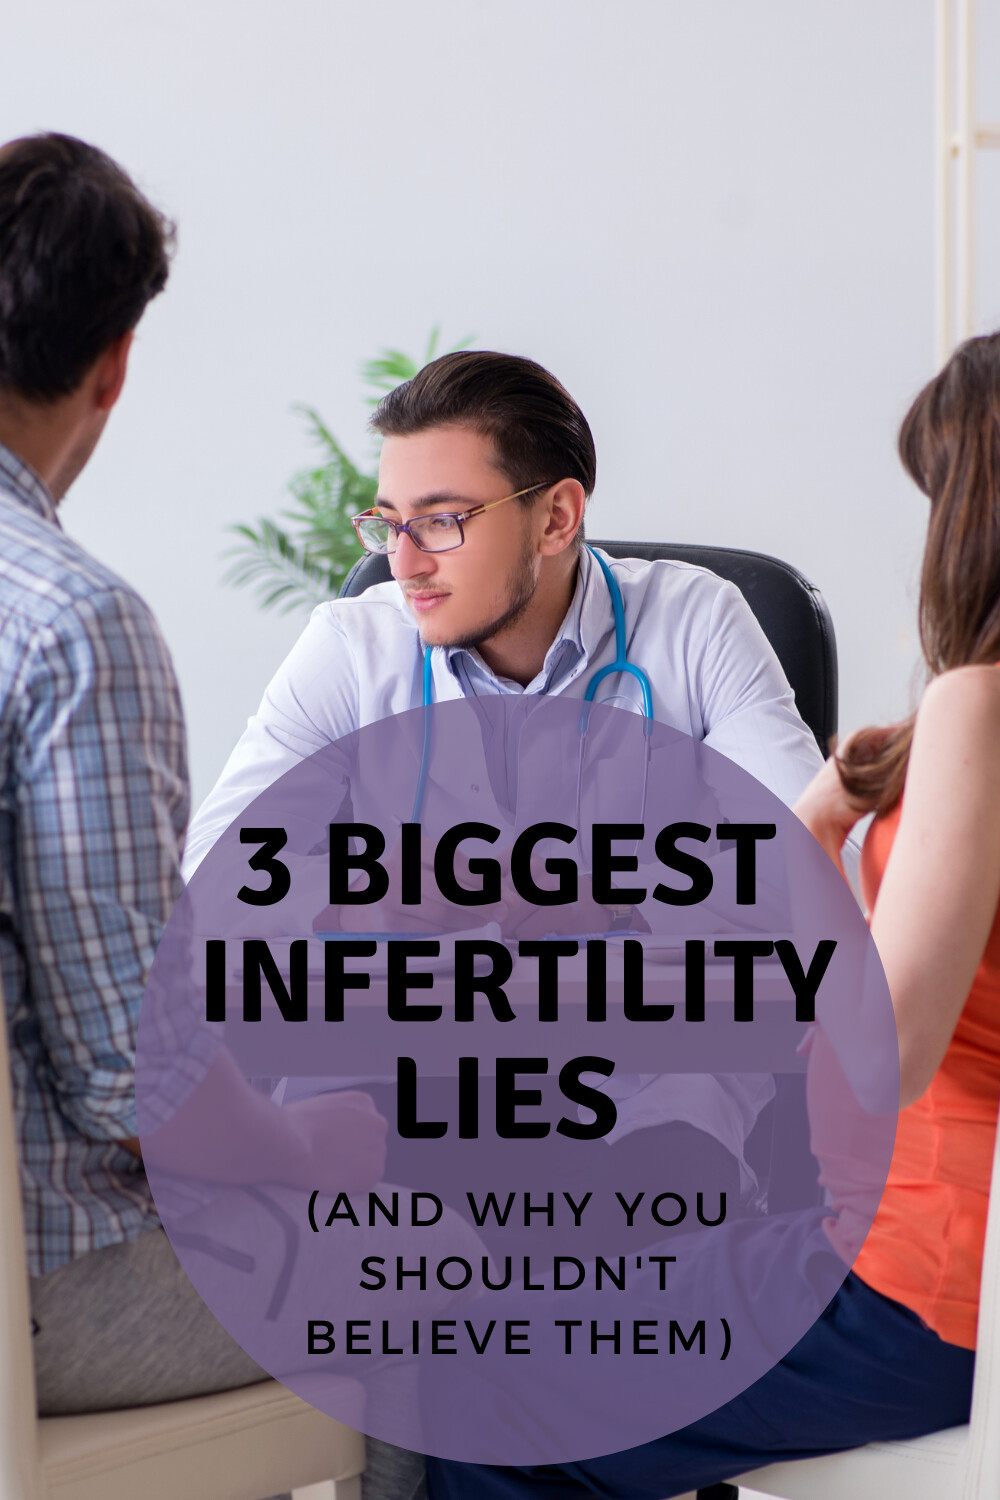 3 BIGGEST infertility lies (and why you shouldn't believe them)